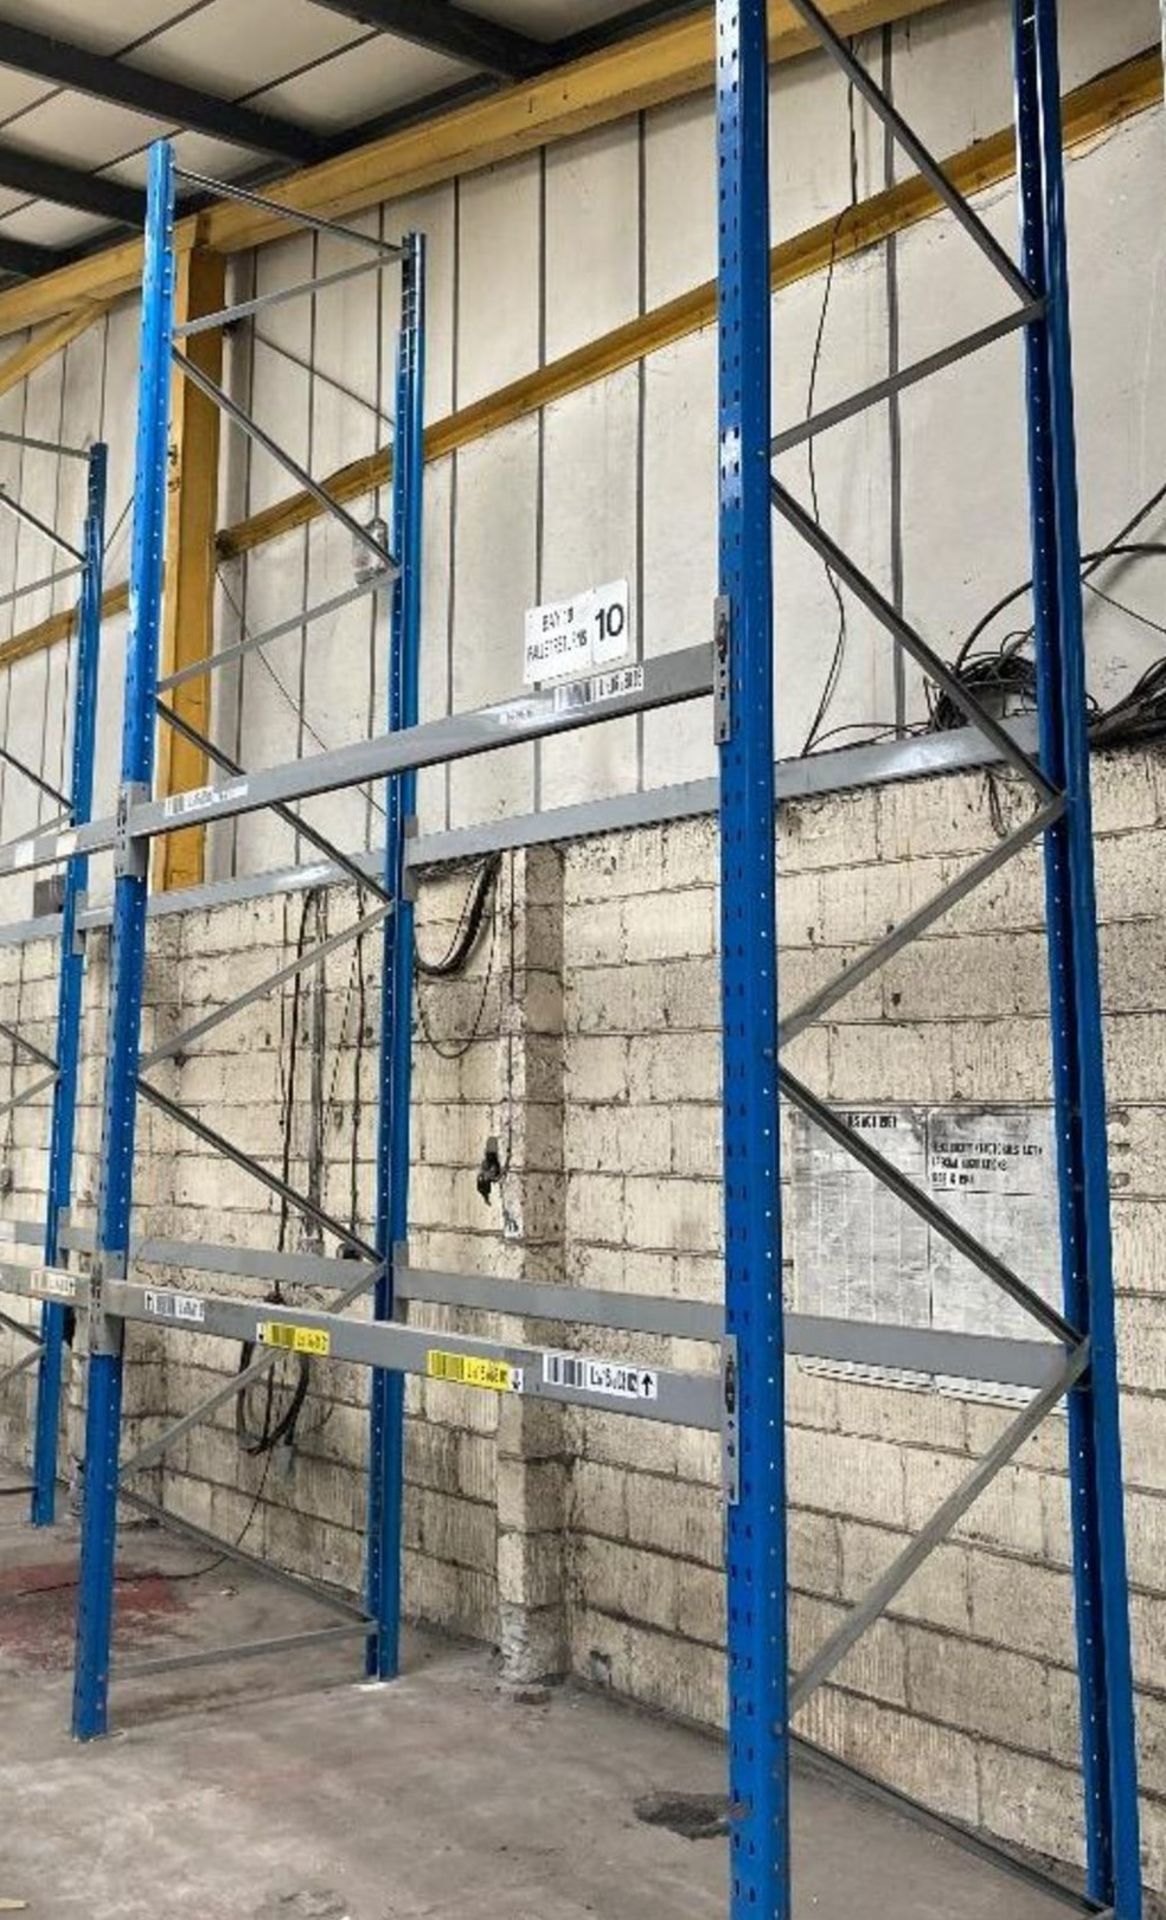 8 x Bays of Heavy Duty Warehouse Pallet Racking - Includes 9 Uprights and 23 Cross Beams - Approx